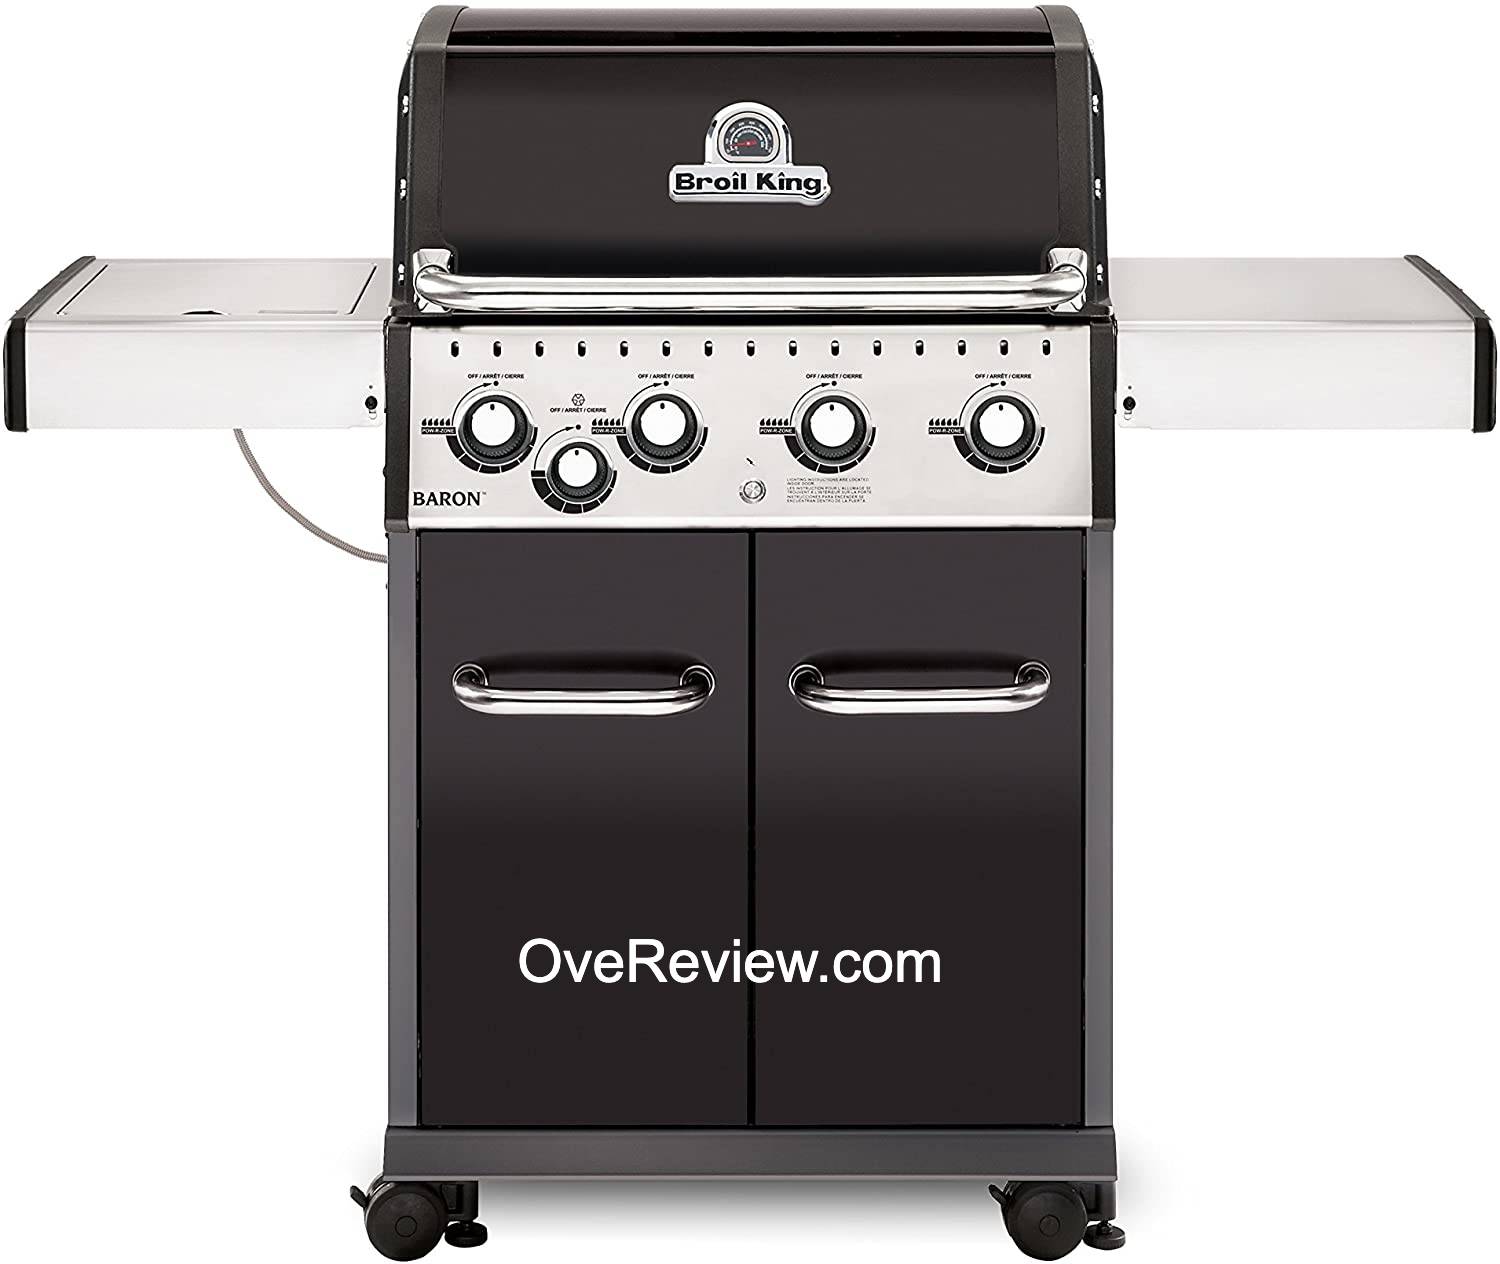 Broil King outdoor gas grill